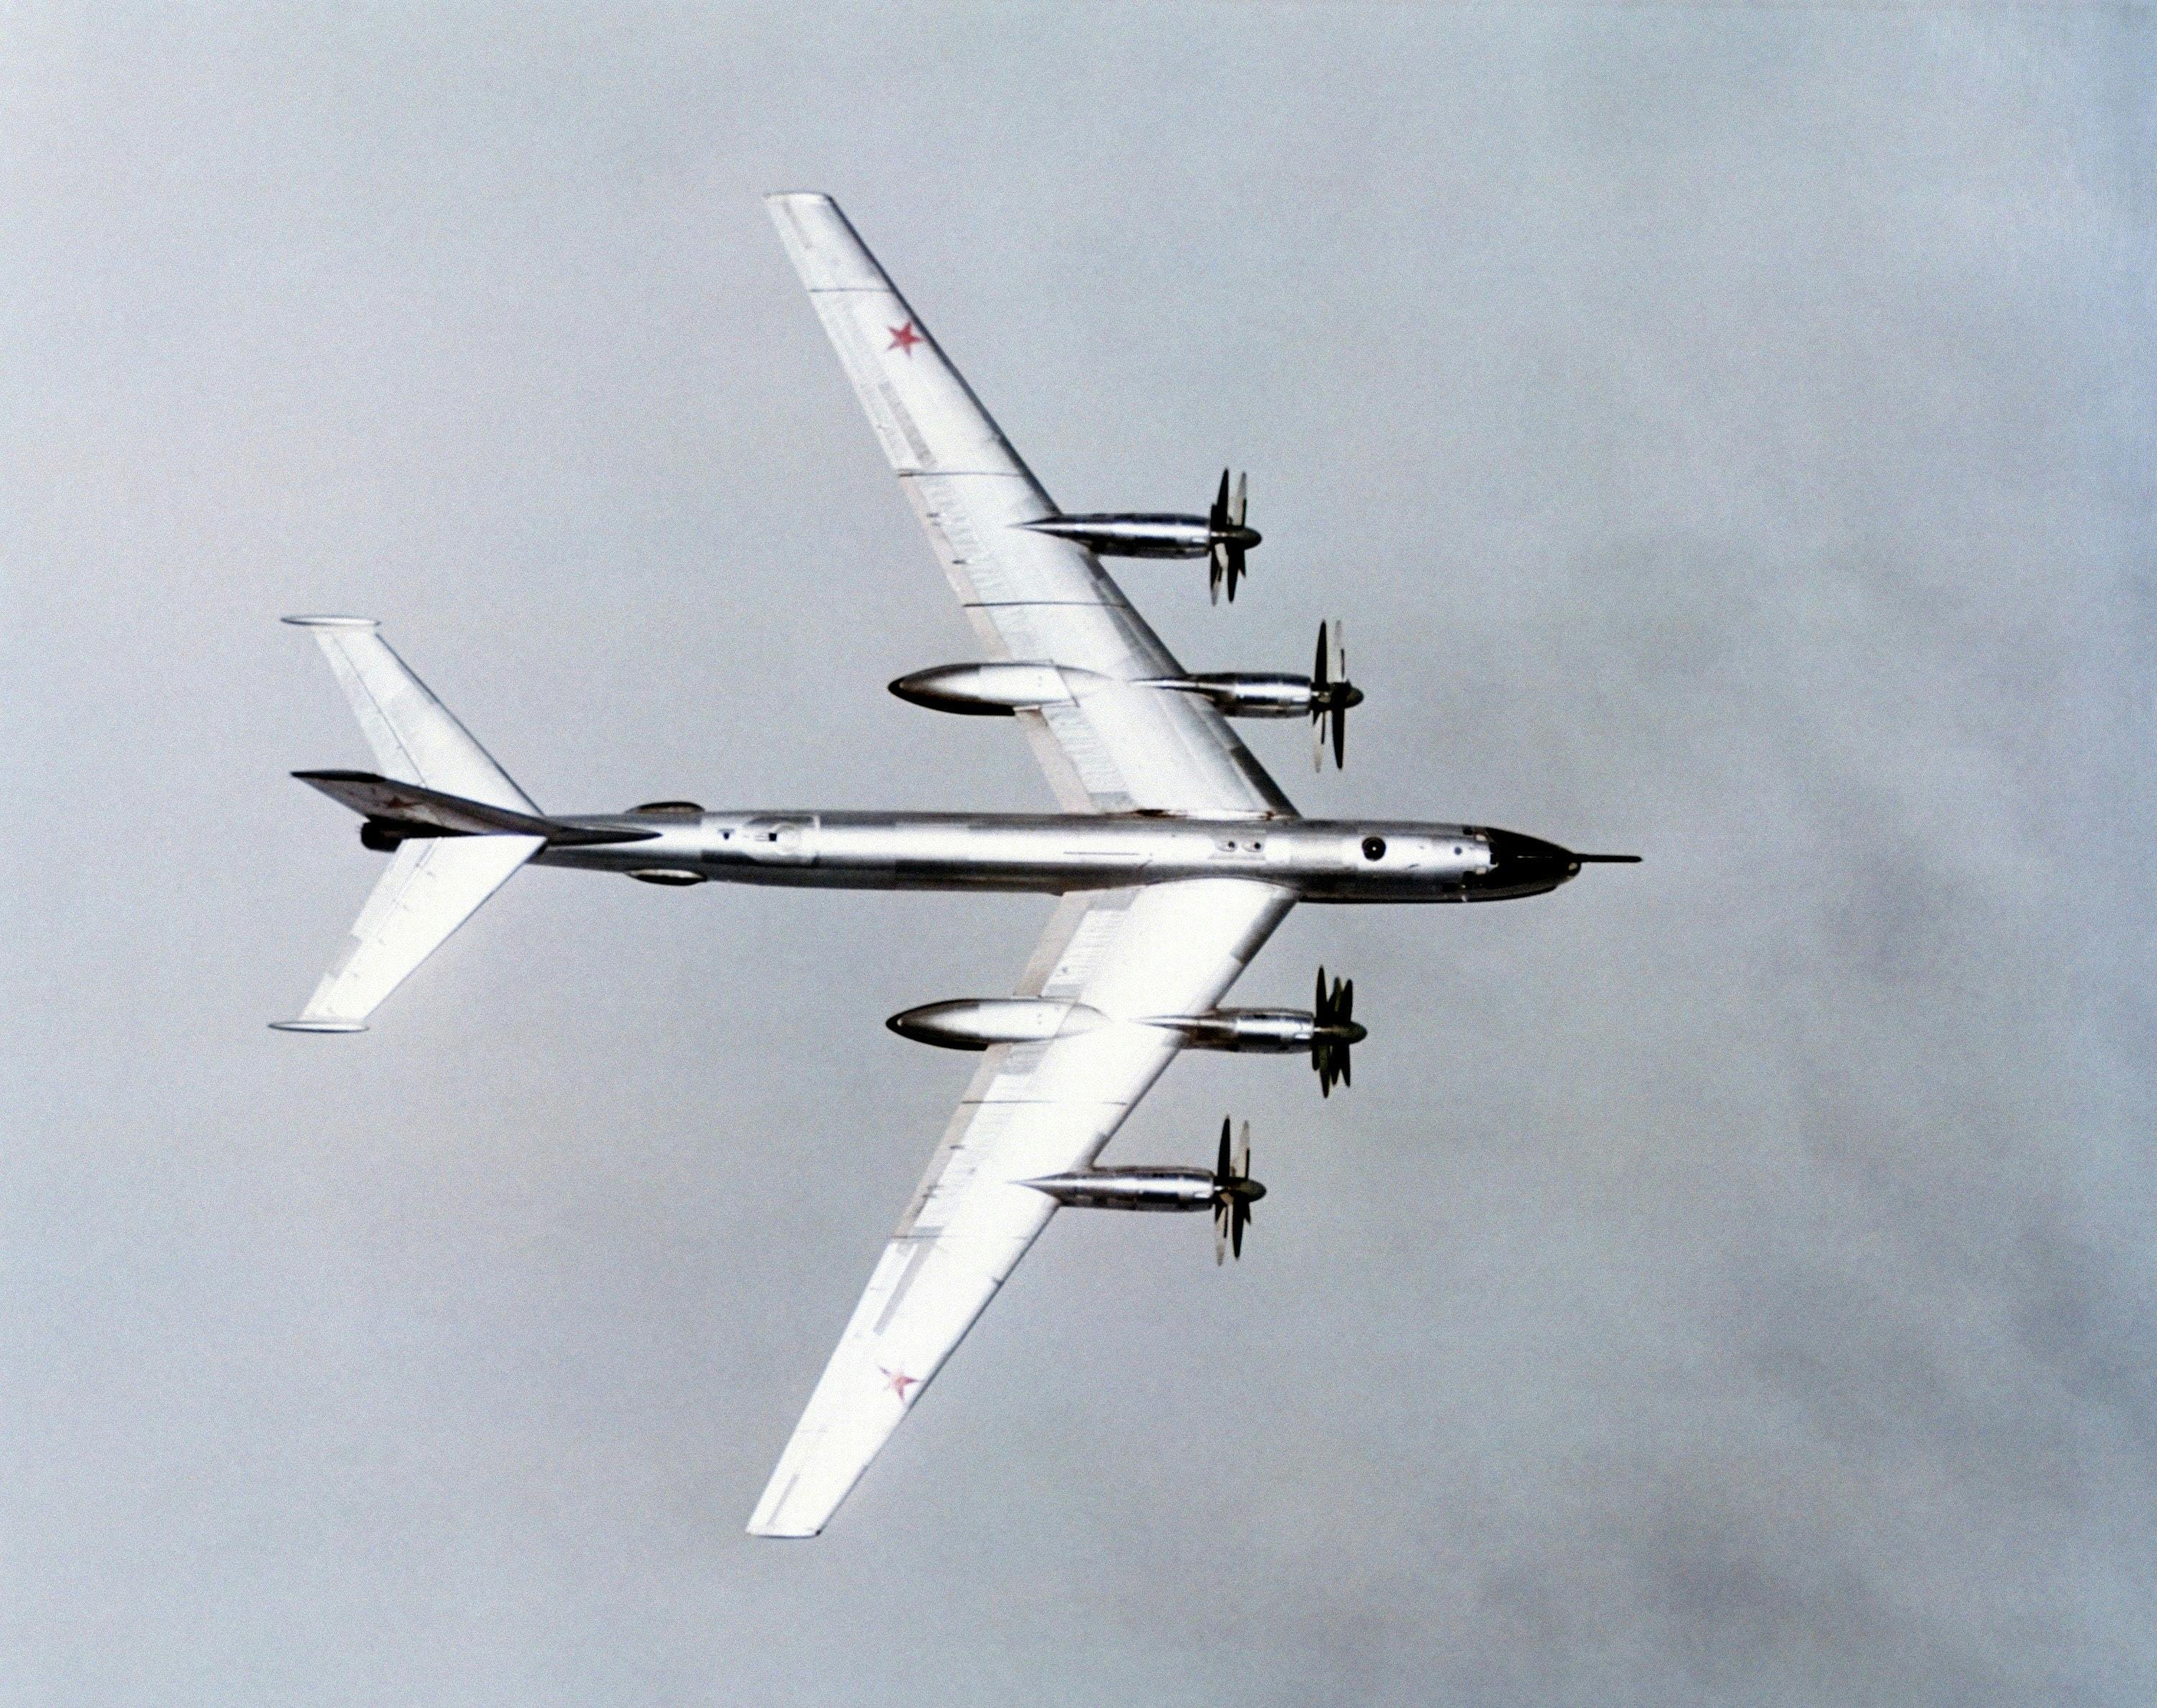 The Russian  Bear Strategic Bomber A Cold  War  relic with a 